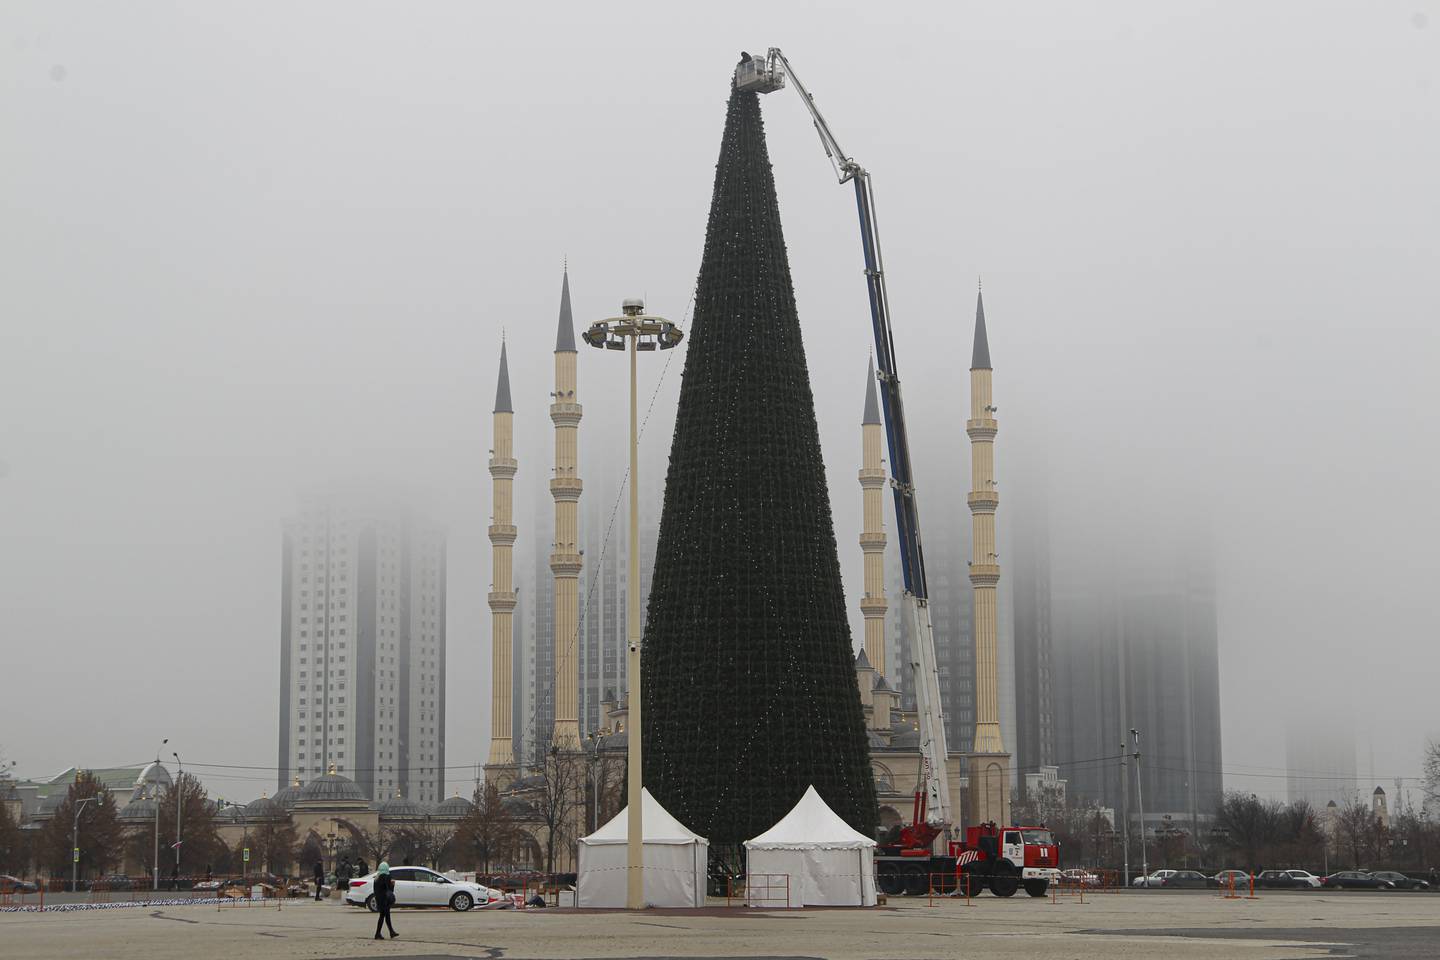 A giant Christmas tree is installed with the main Mosque and skyscrapers in the background, for Festivities celebrations in downtown Grozny, the capital of Chechnya, southern Russia, Tuesday, Dec. 7, 2021. (AP Photo/Musa Sadulayev)